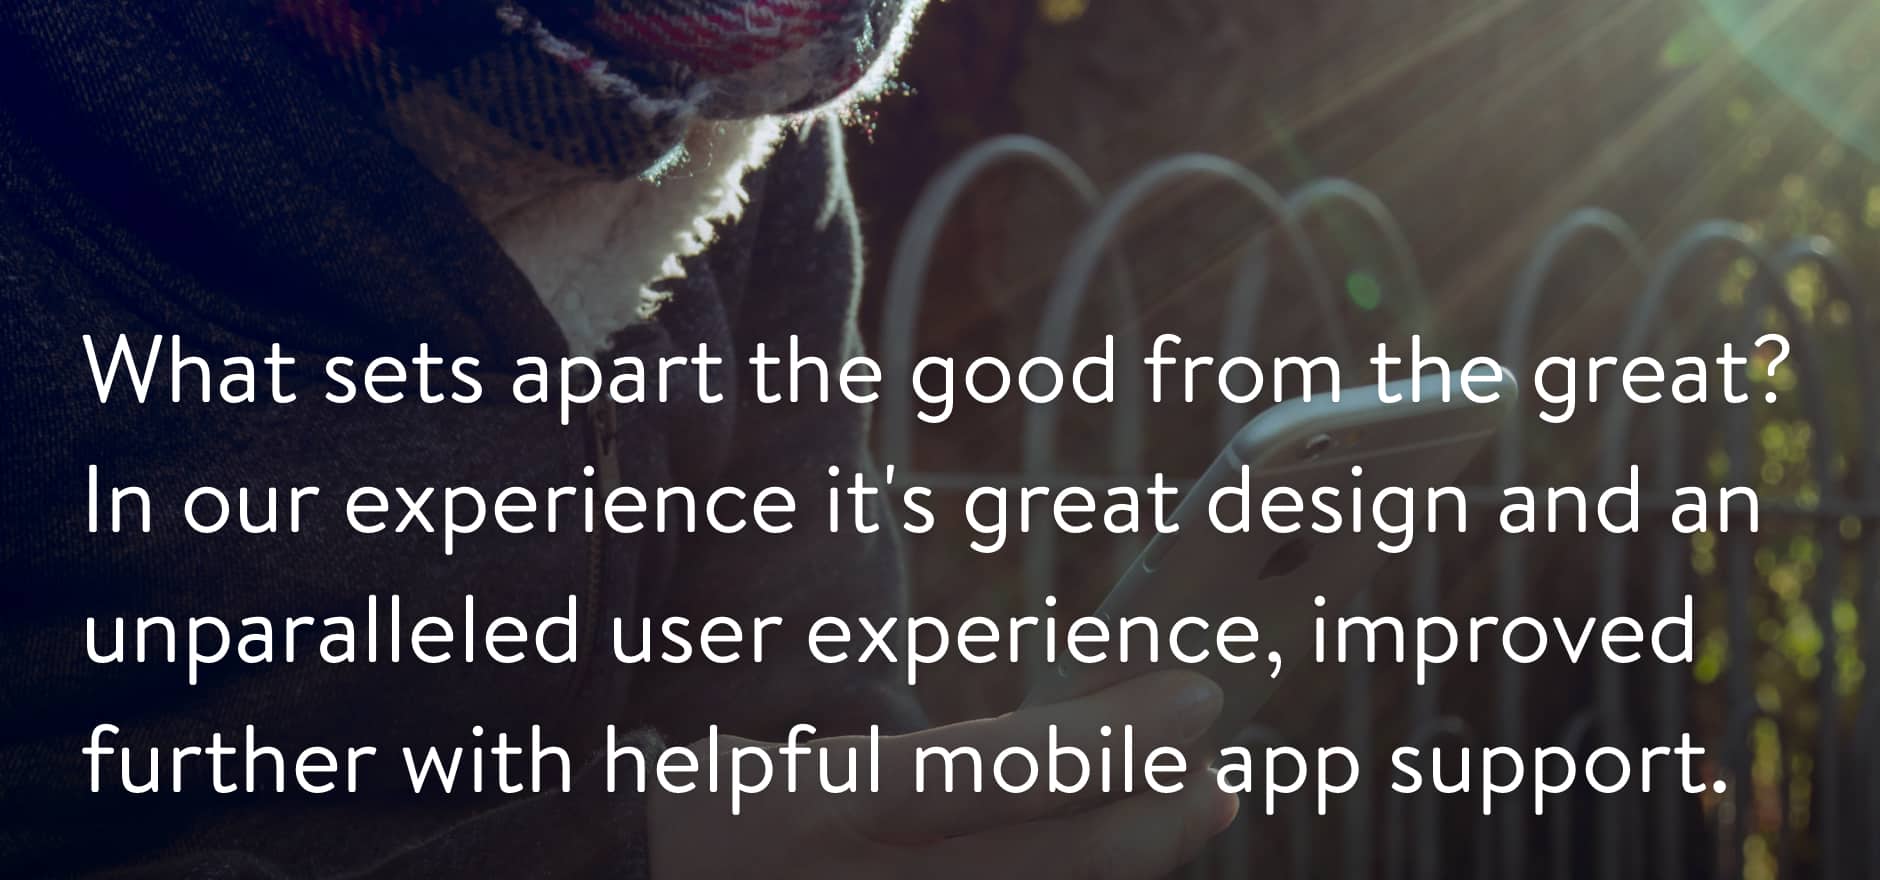 What sets apart the good from the great? In our experience it's great design and an unparalleled user experience, improved further with helpful mobile app support.